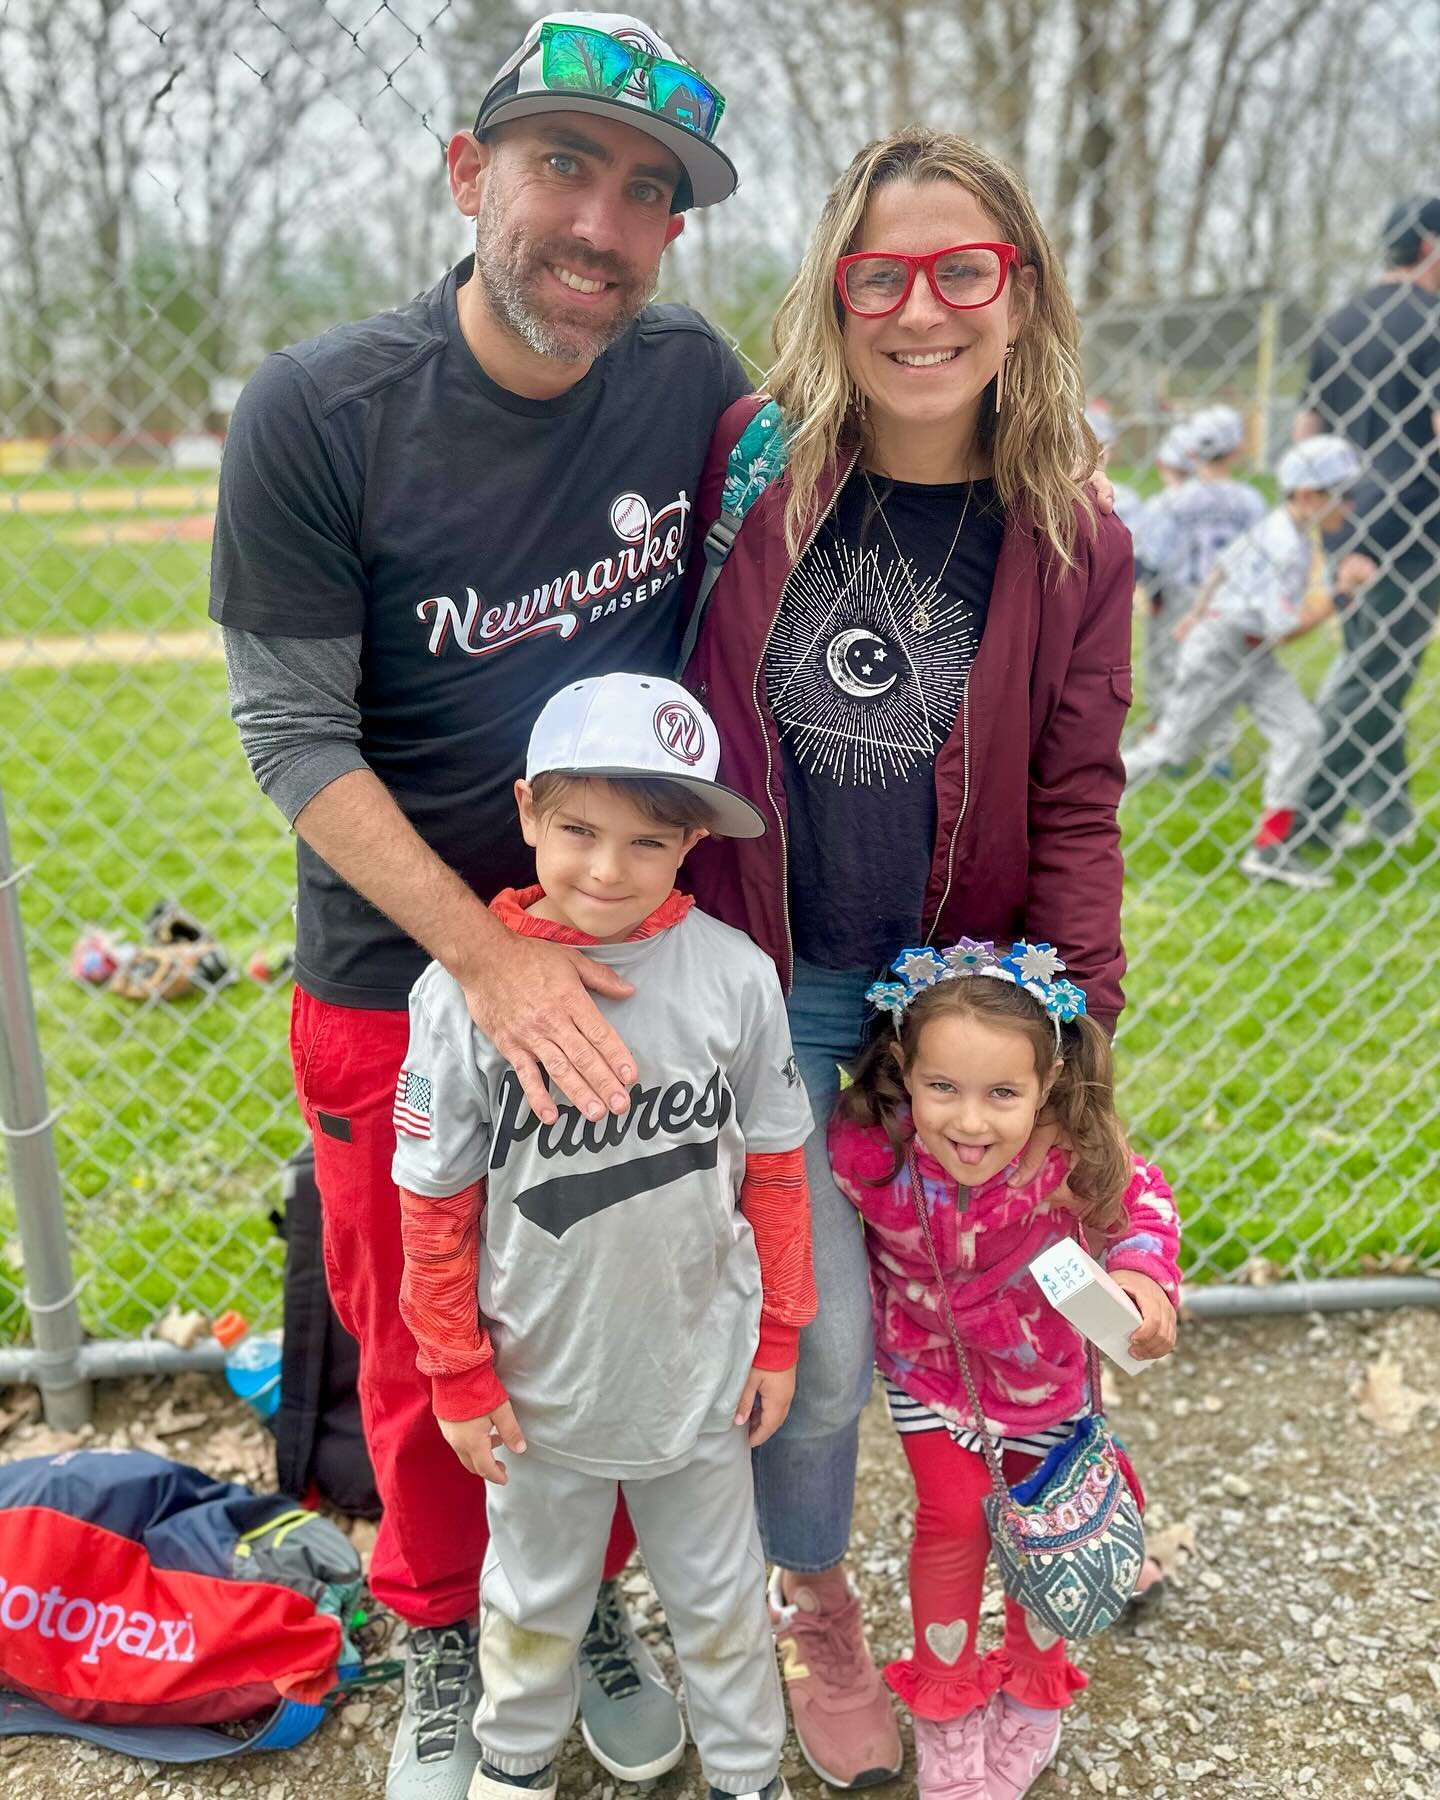 Always posting beautiful things, but the most beautiful thing in my mind is my adorable little family. Especially on first baseball day, no &ldquo;daisy pickers&rdquo;on this team of little first graders, they rocked! Too cute these mini players! 

A